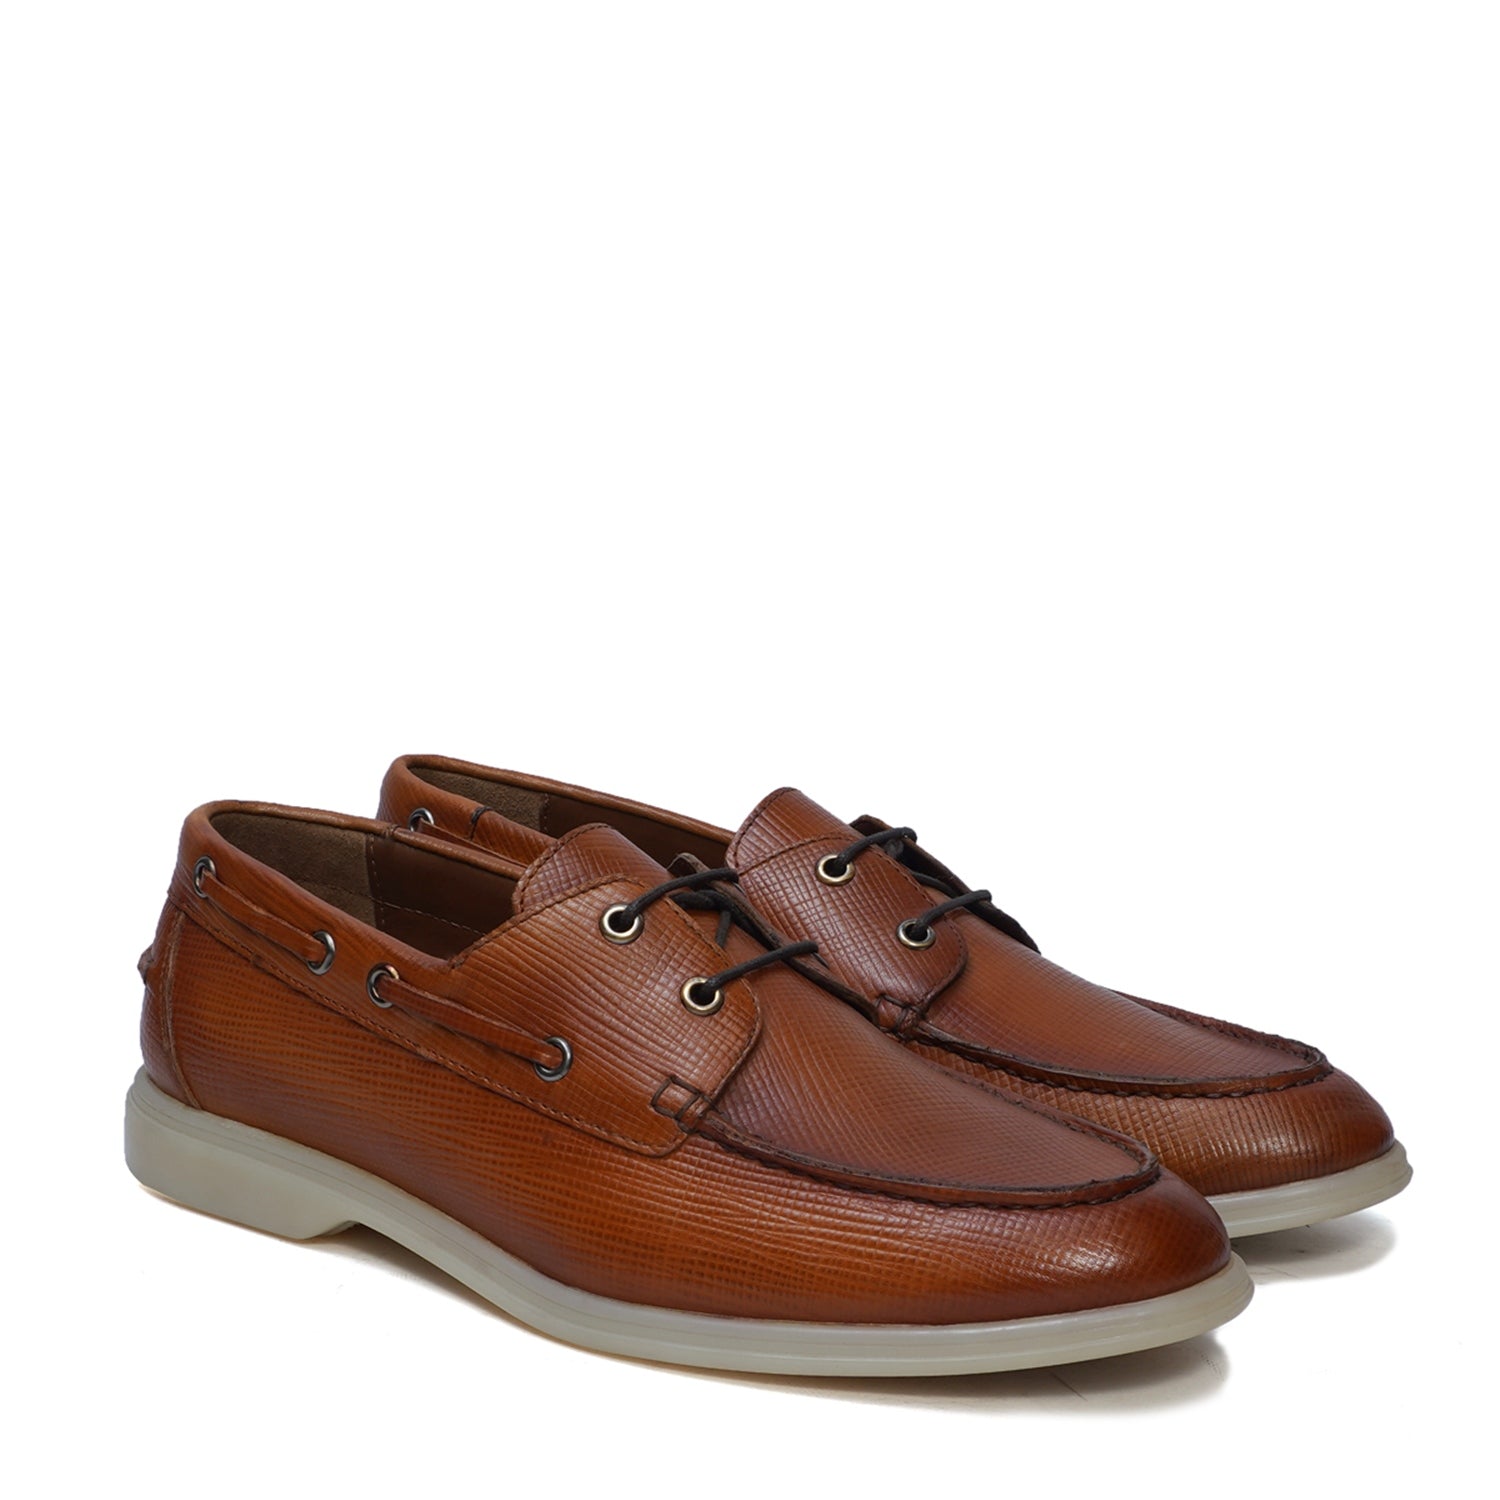 Tan Boat Shoes in Saffiano leather